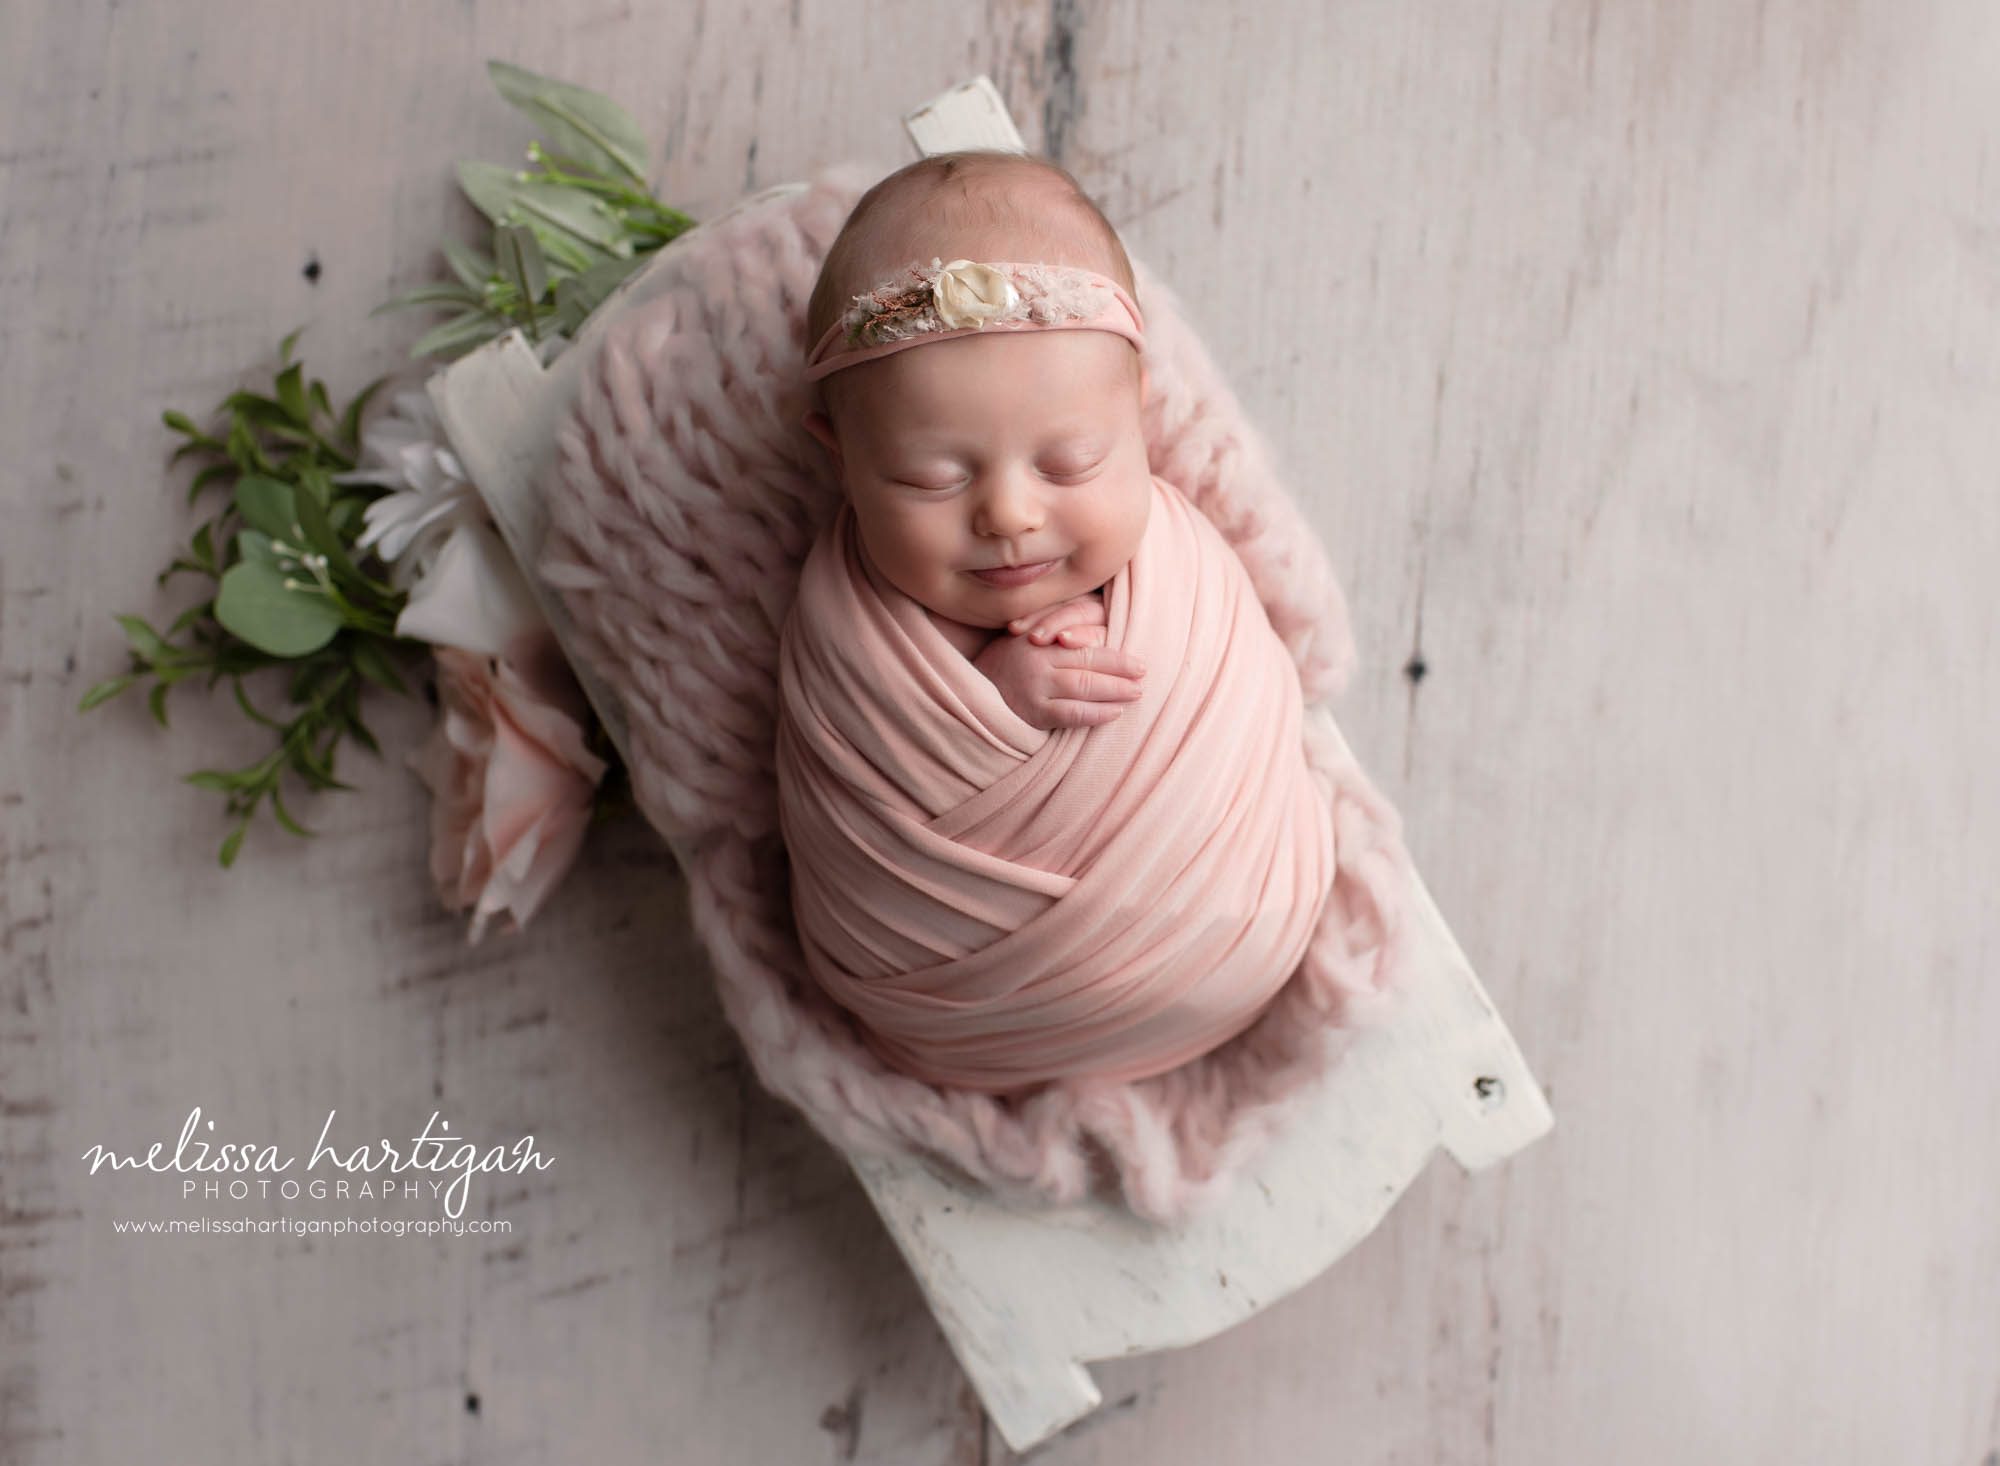 baby girl wrapped in pink wrap, pink knitted layer, pink floral headband and floral elements around wooden prop coventry ct newborn photography